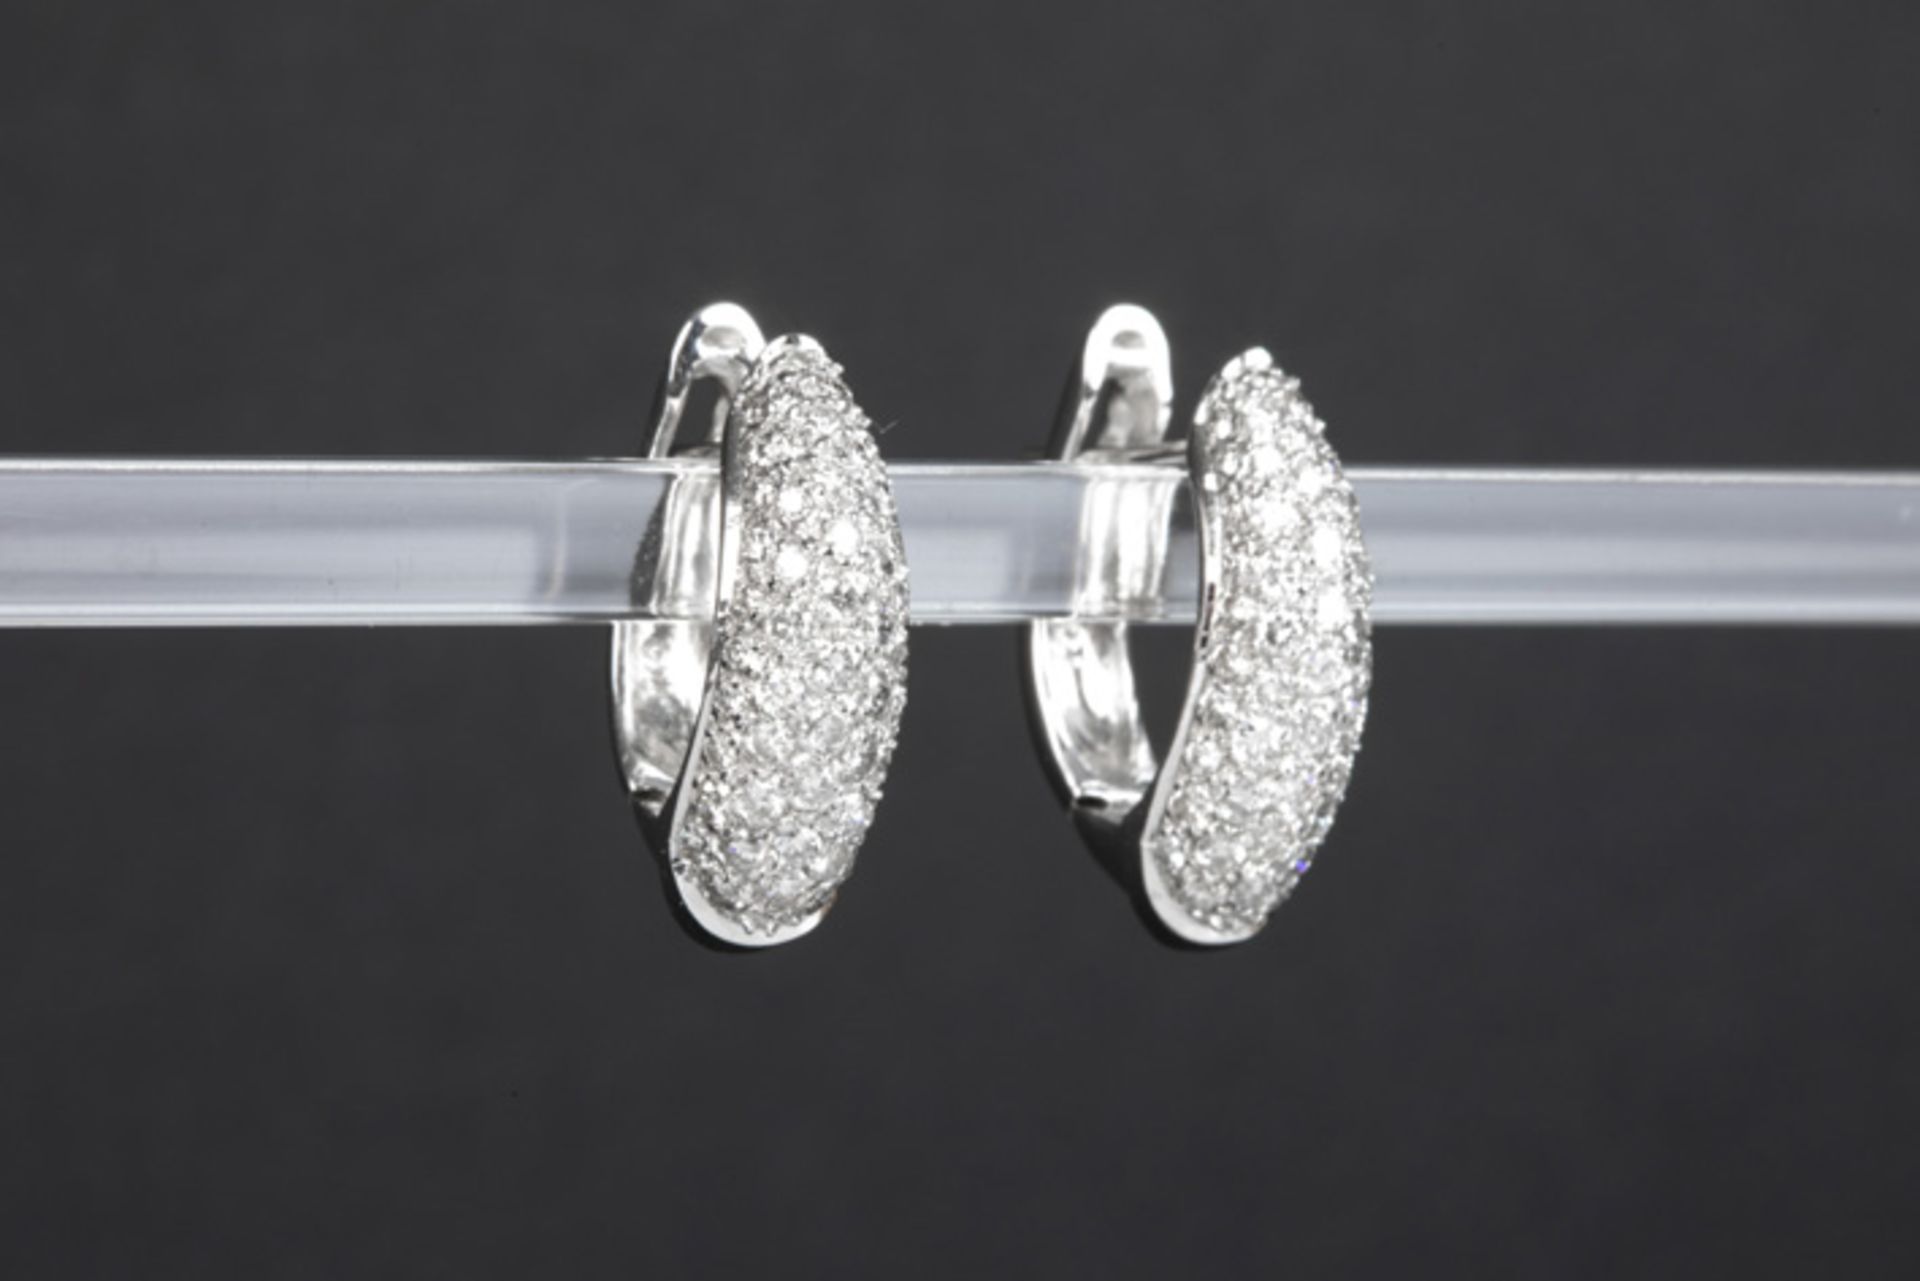 pair of earrings in white gold (18 carat) with ca 2,20 carat of high quality brilliant cut